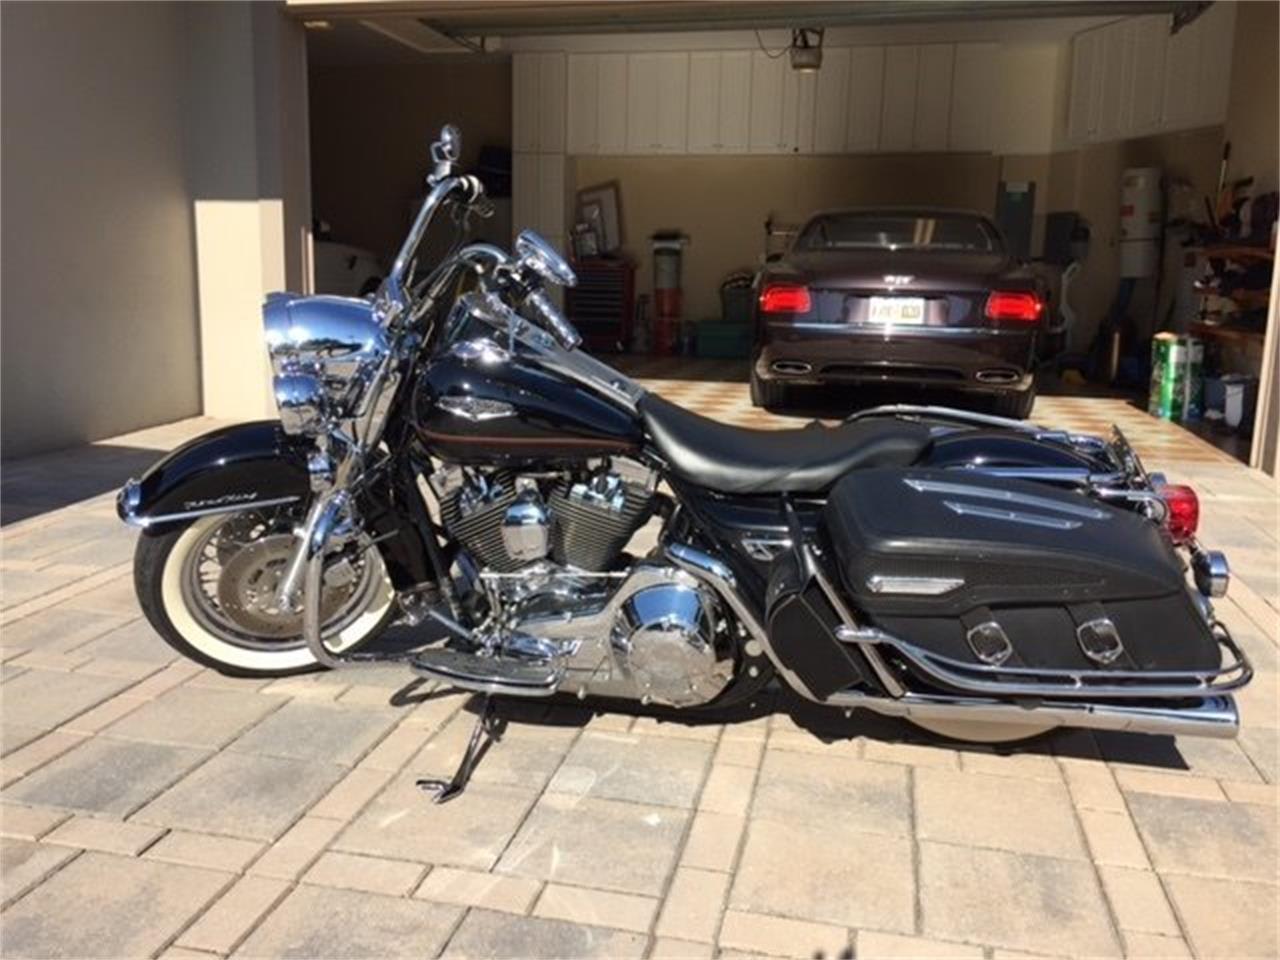 99 road king for sale off 61 